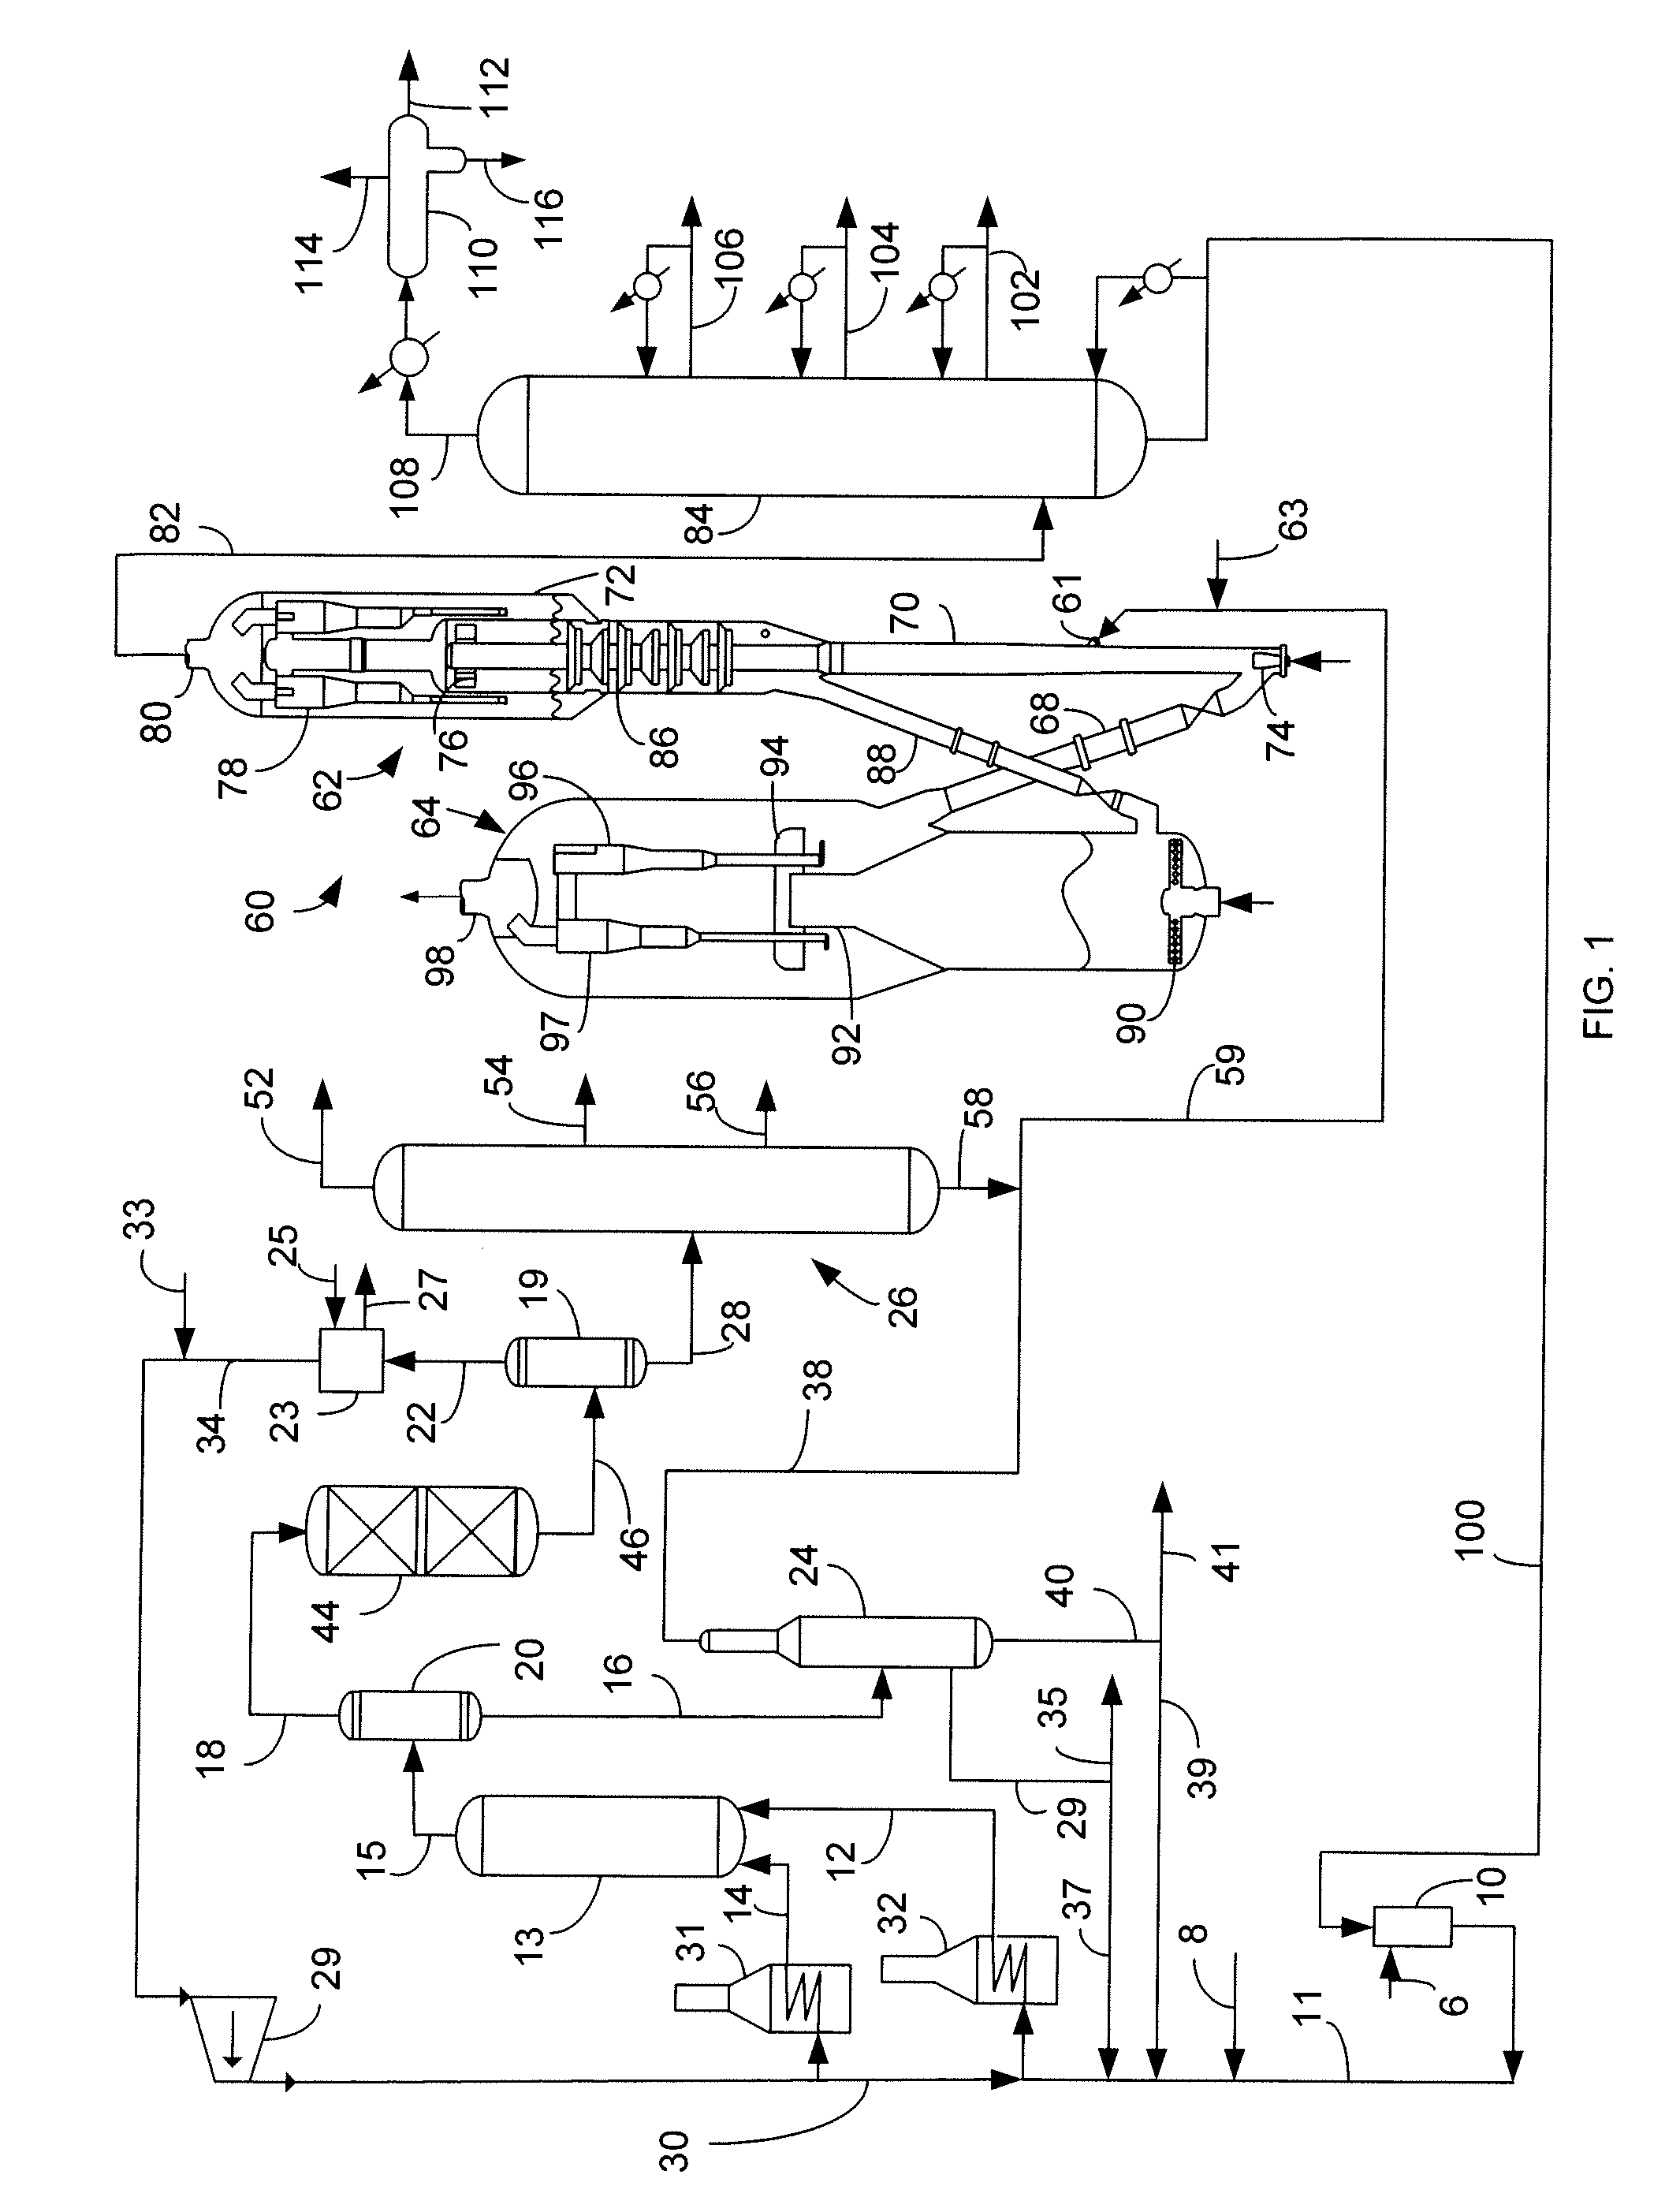 Apparatus for Integrated Heavy Oil Upgrading